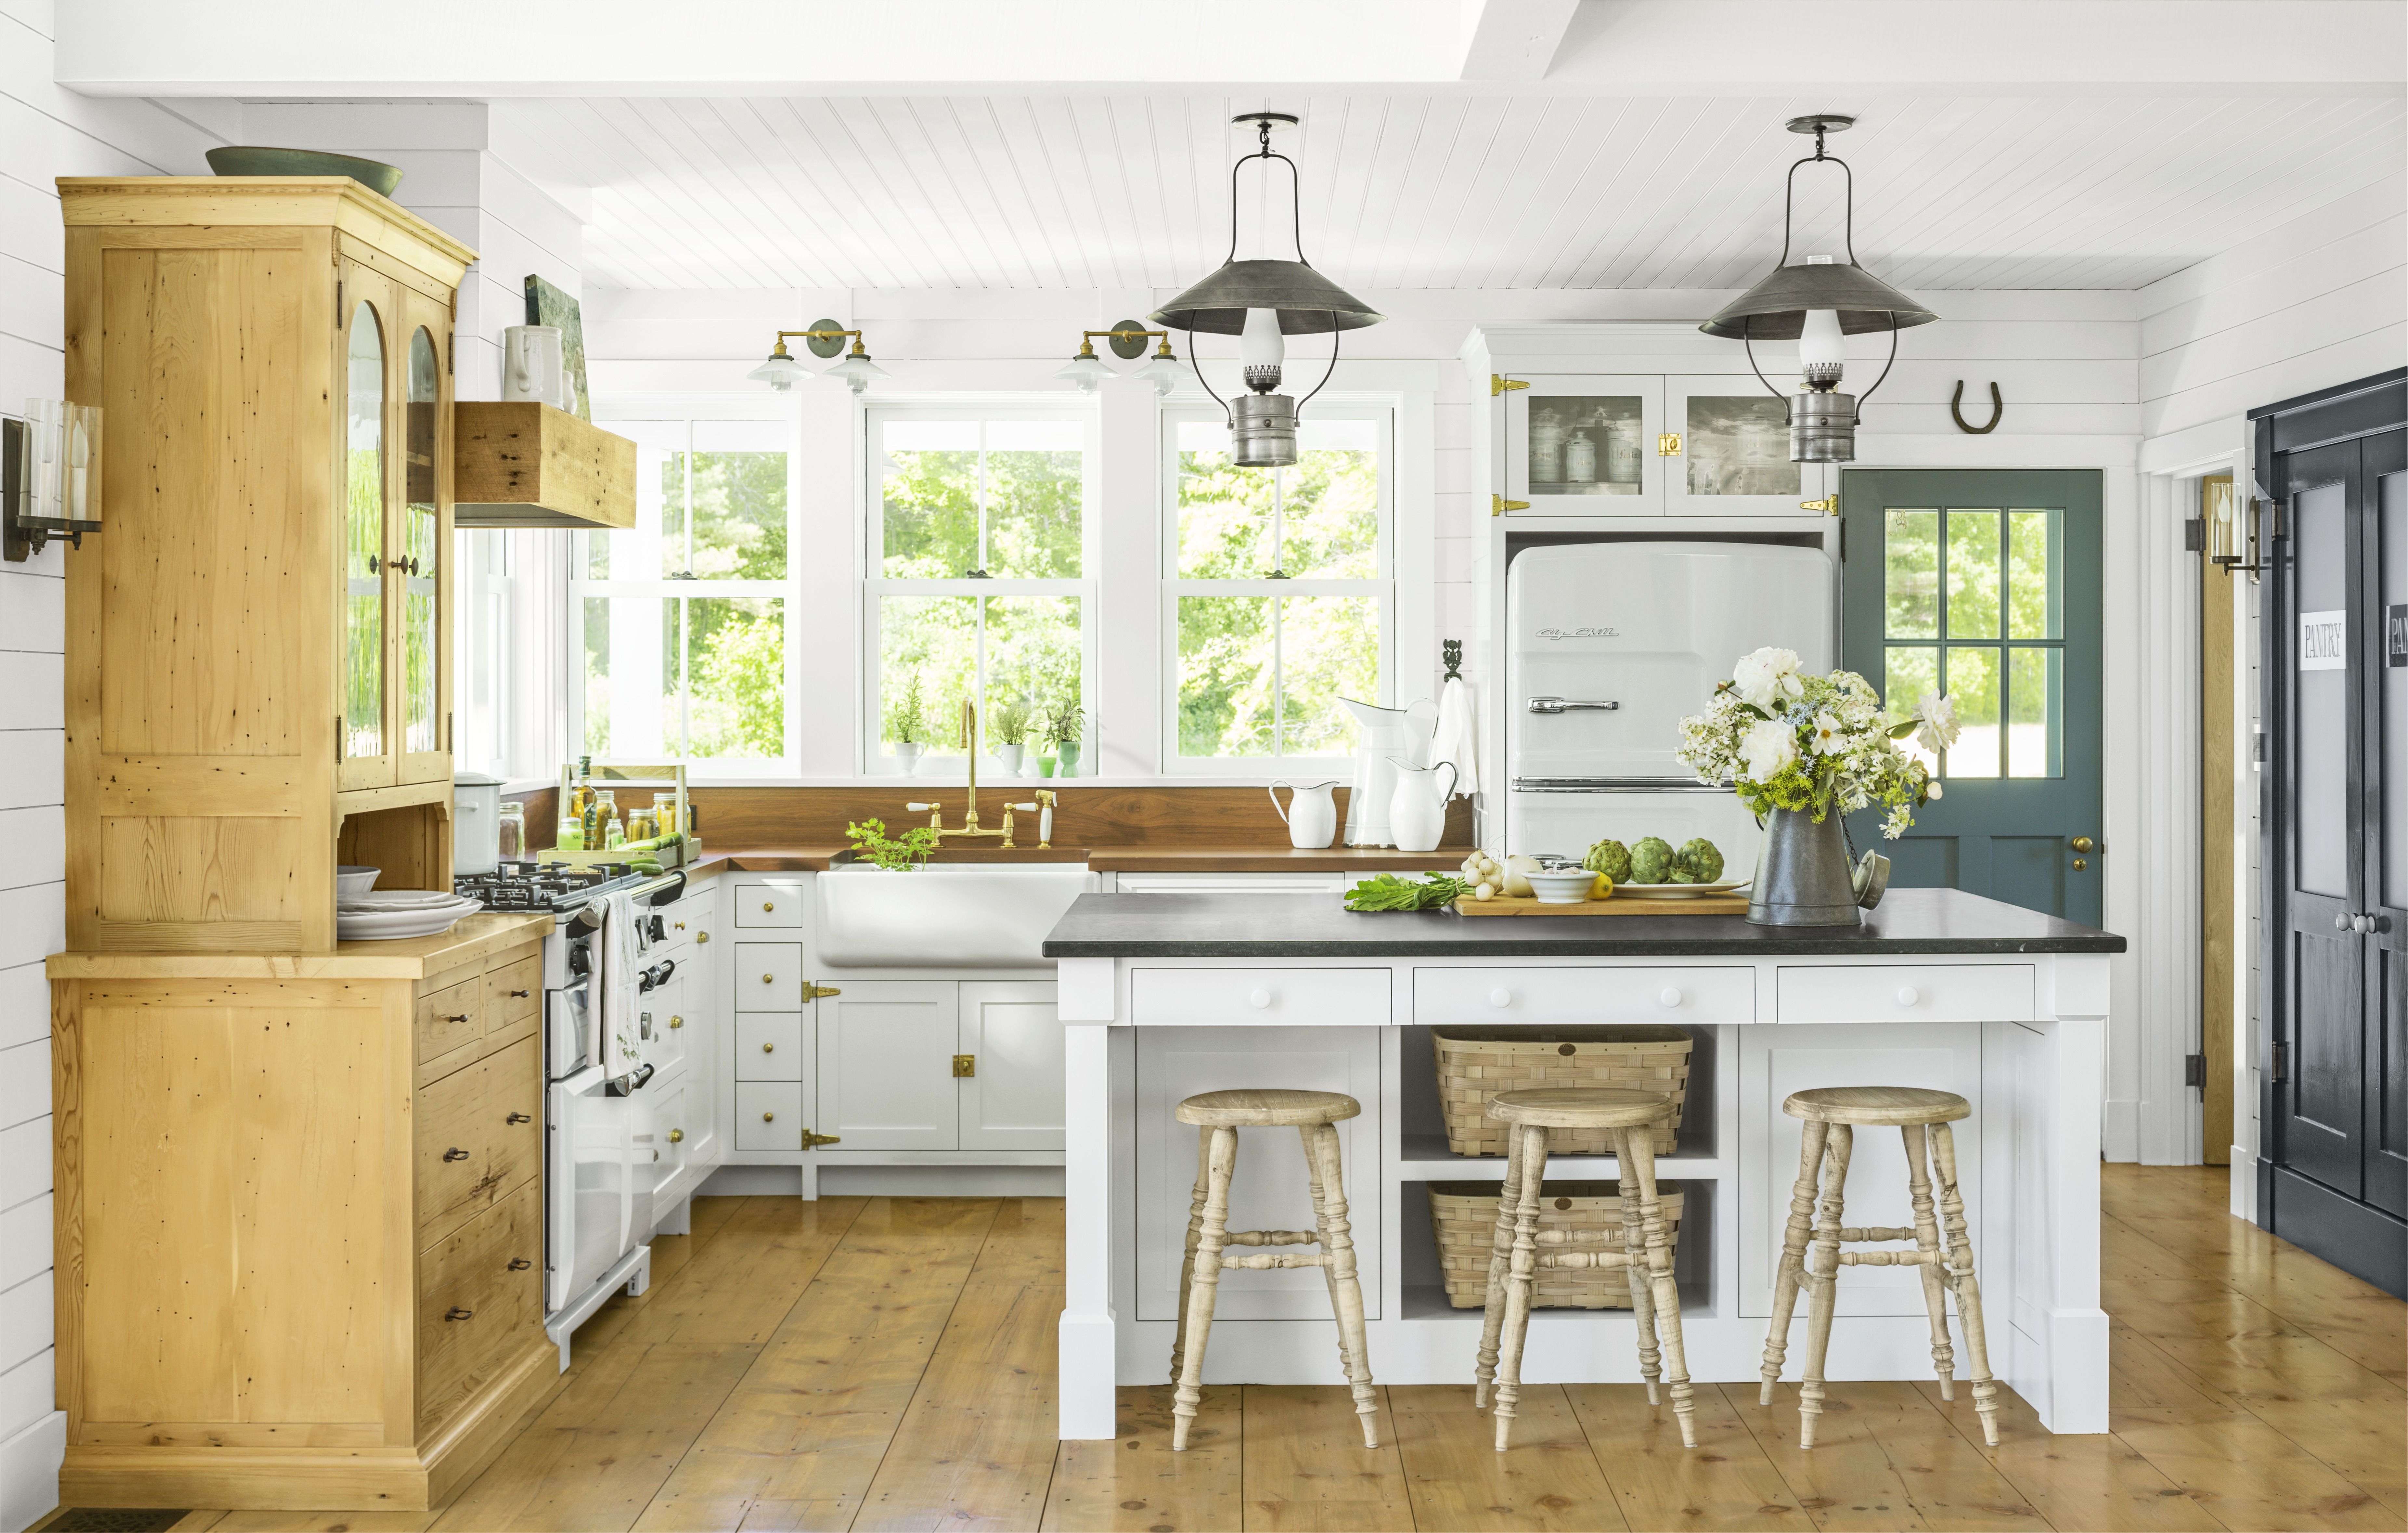 11 Wall Paint Colors to Pair with White Kitchen Cabinets